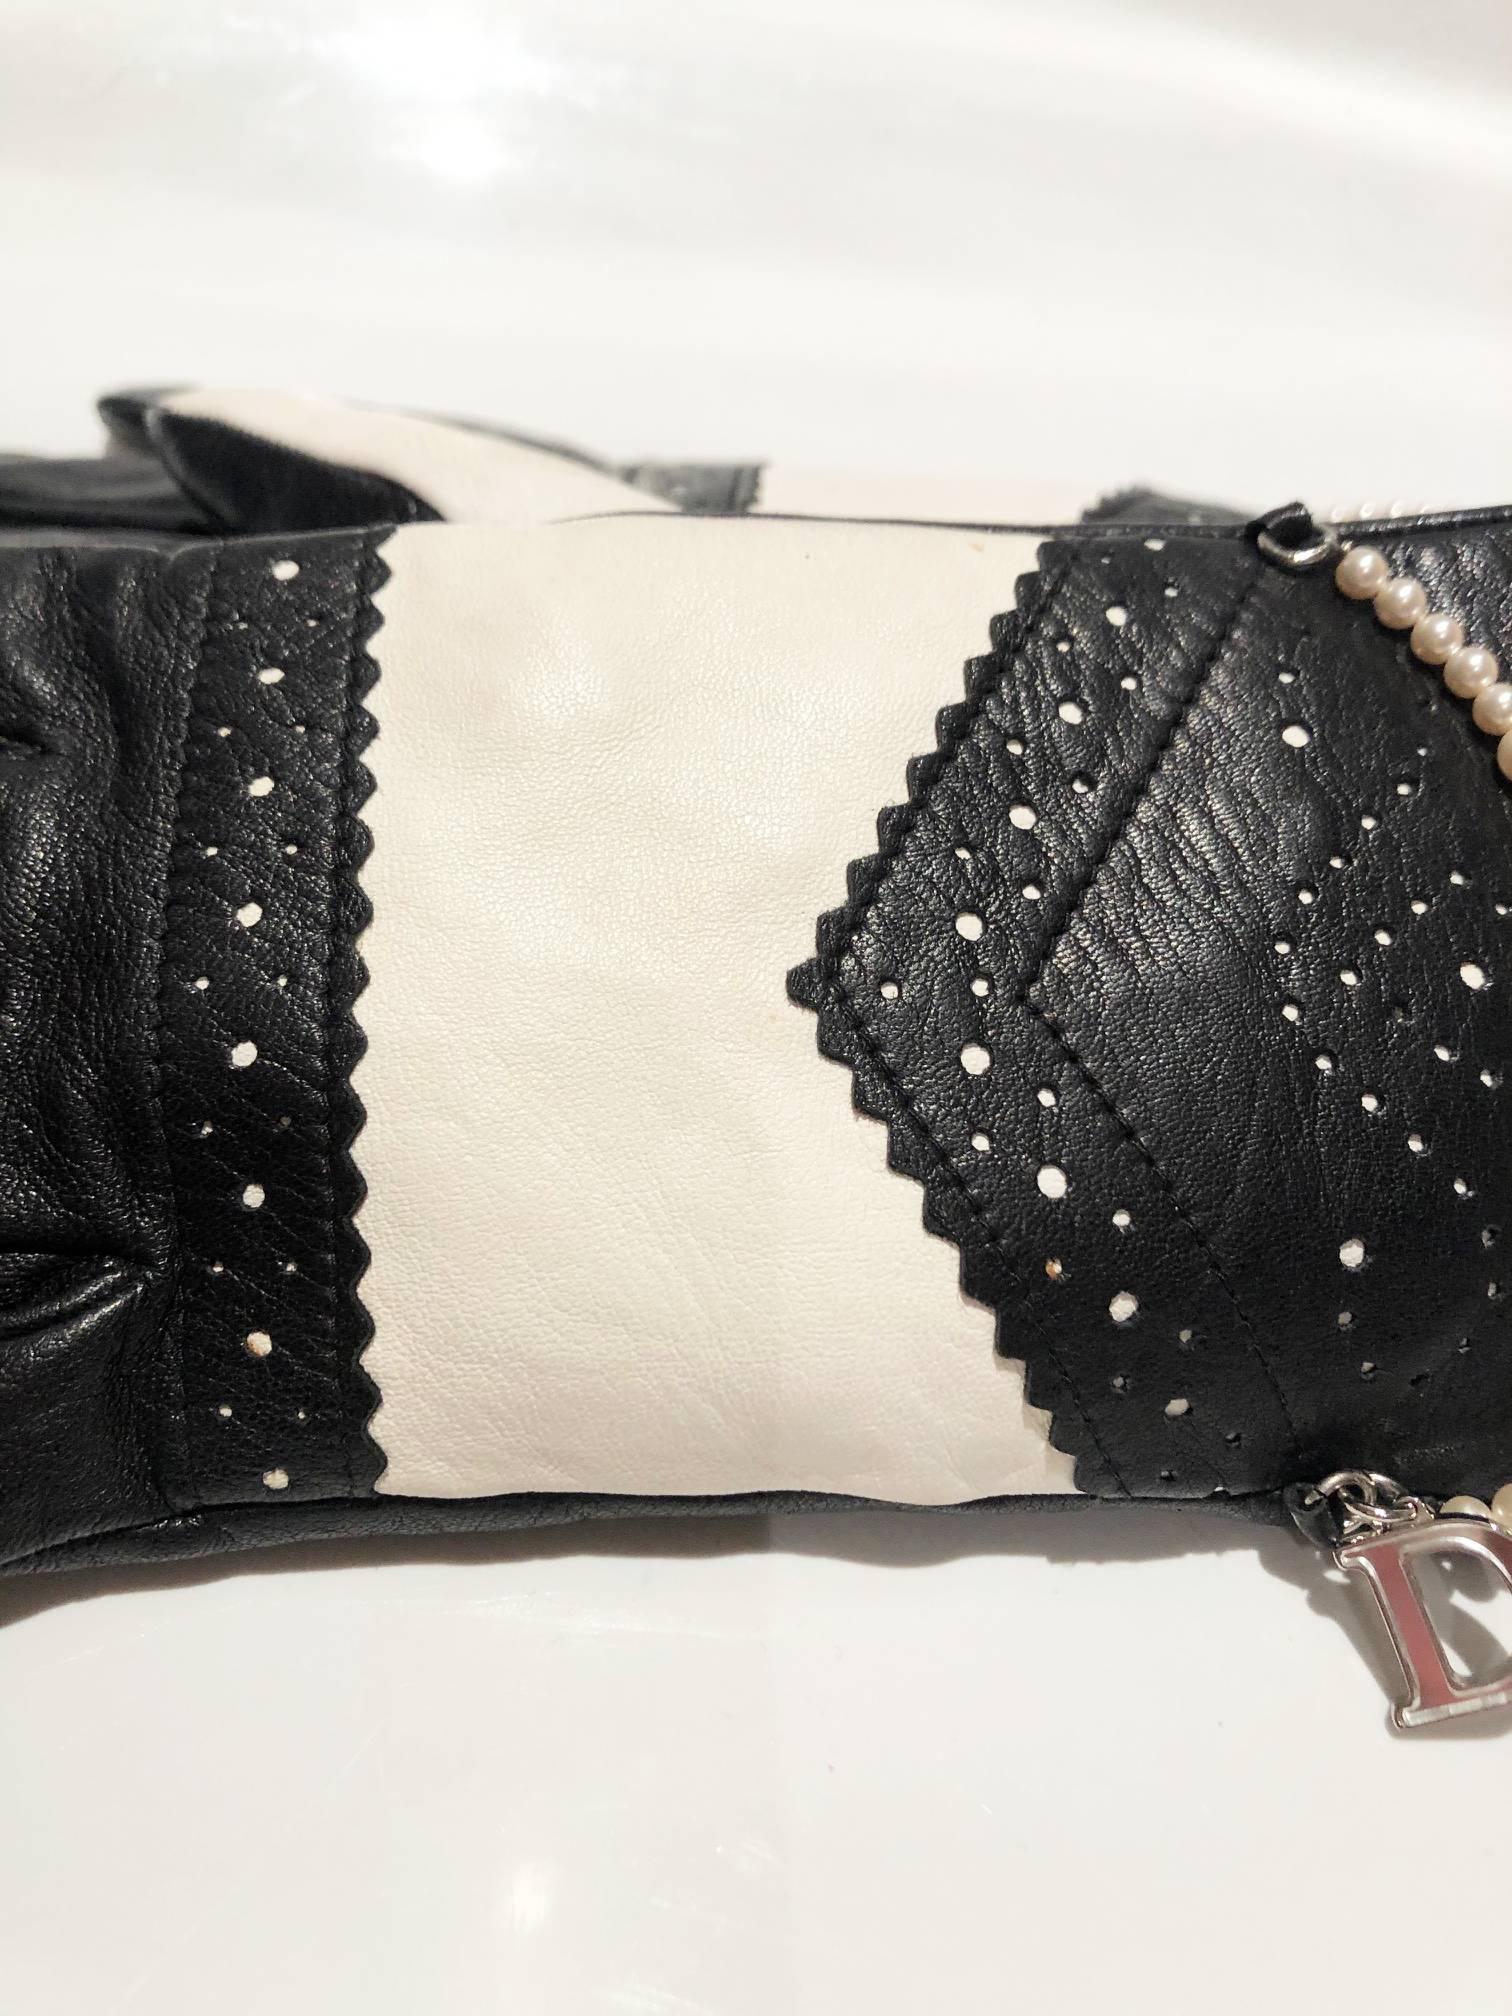 Women's 1990s CHRISTIAN DIOR BLACK WHITE LEATHER GLOVES WITH PEARLS